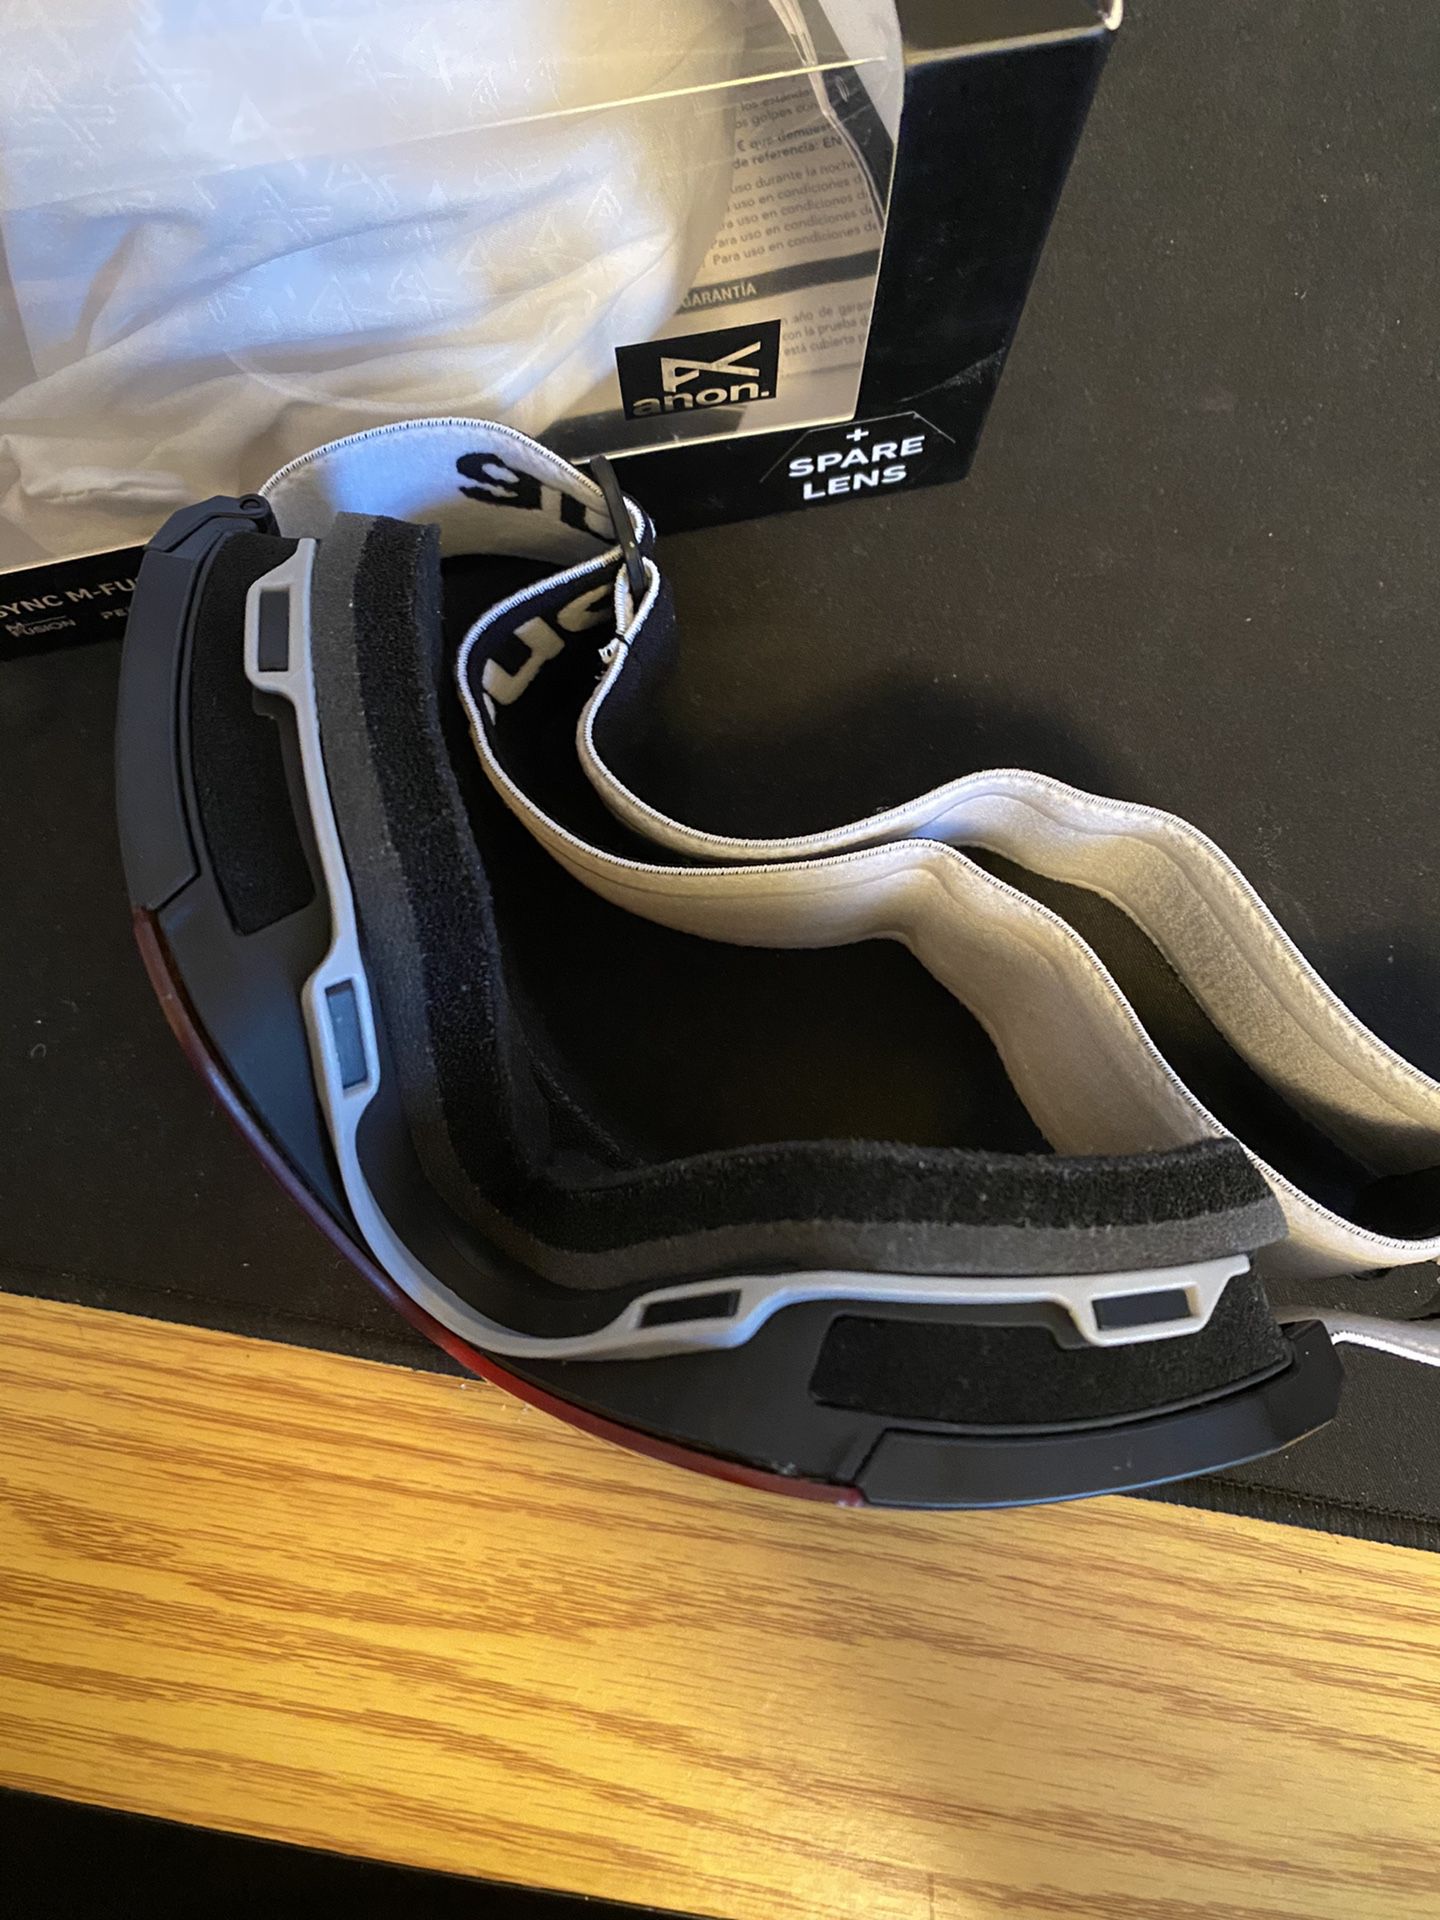 Anon Sync M-Fusion Goggles for Sale in Bellingham, WA - OfferUp